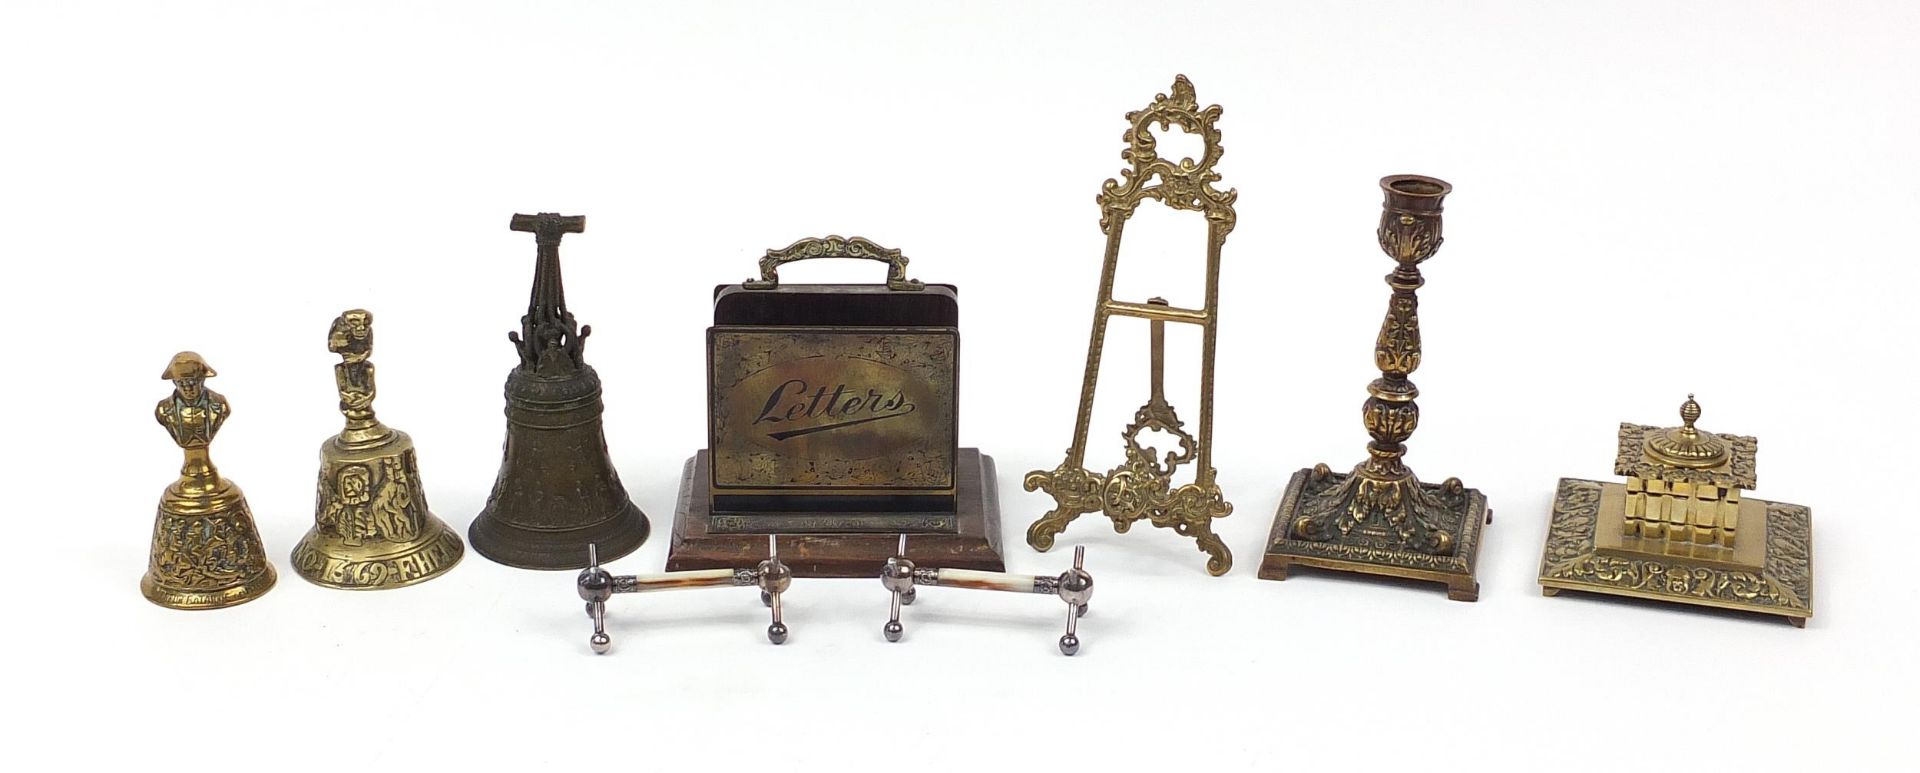 19th century and later metalware including three classical bronzed bells, one with Napoleon